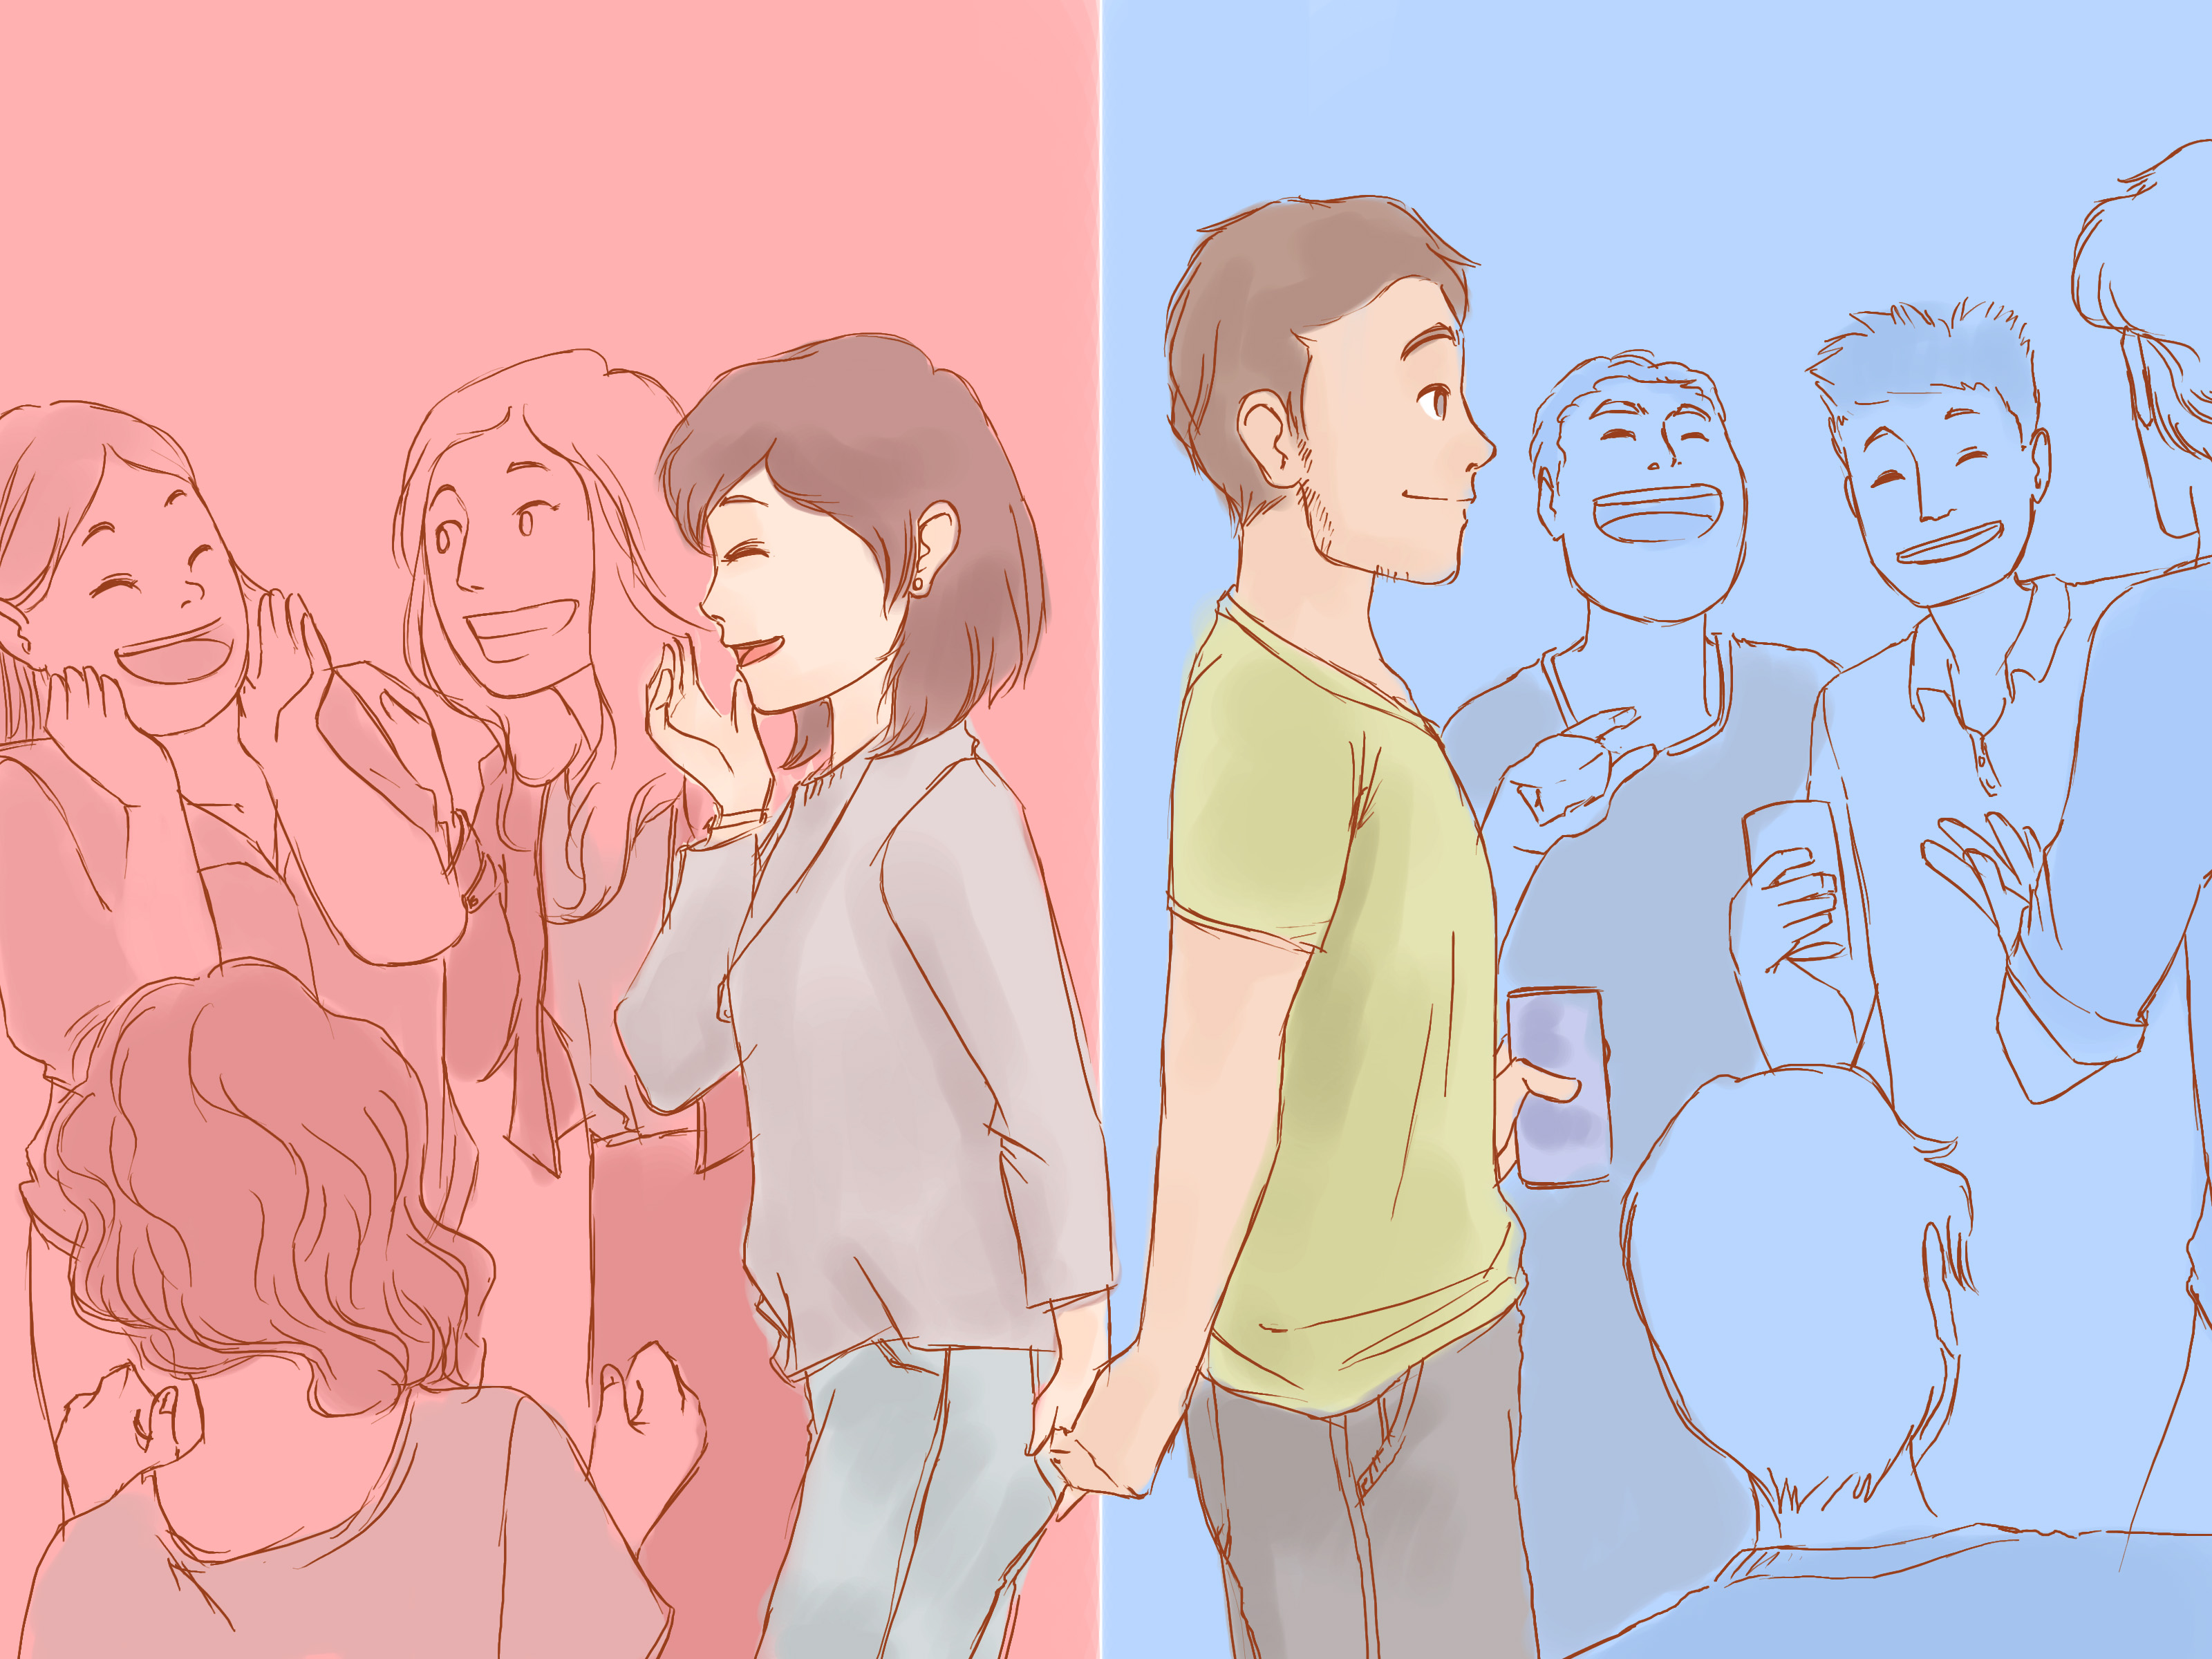 How to Be a Good Boyfriend (with Examples) - wikiHow